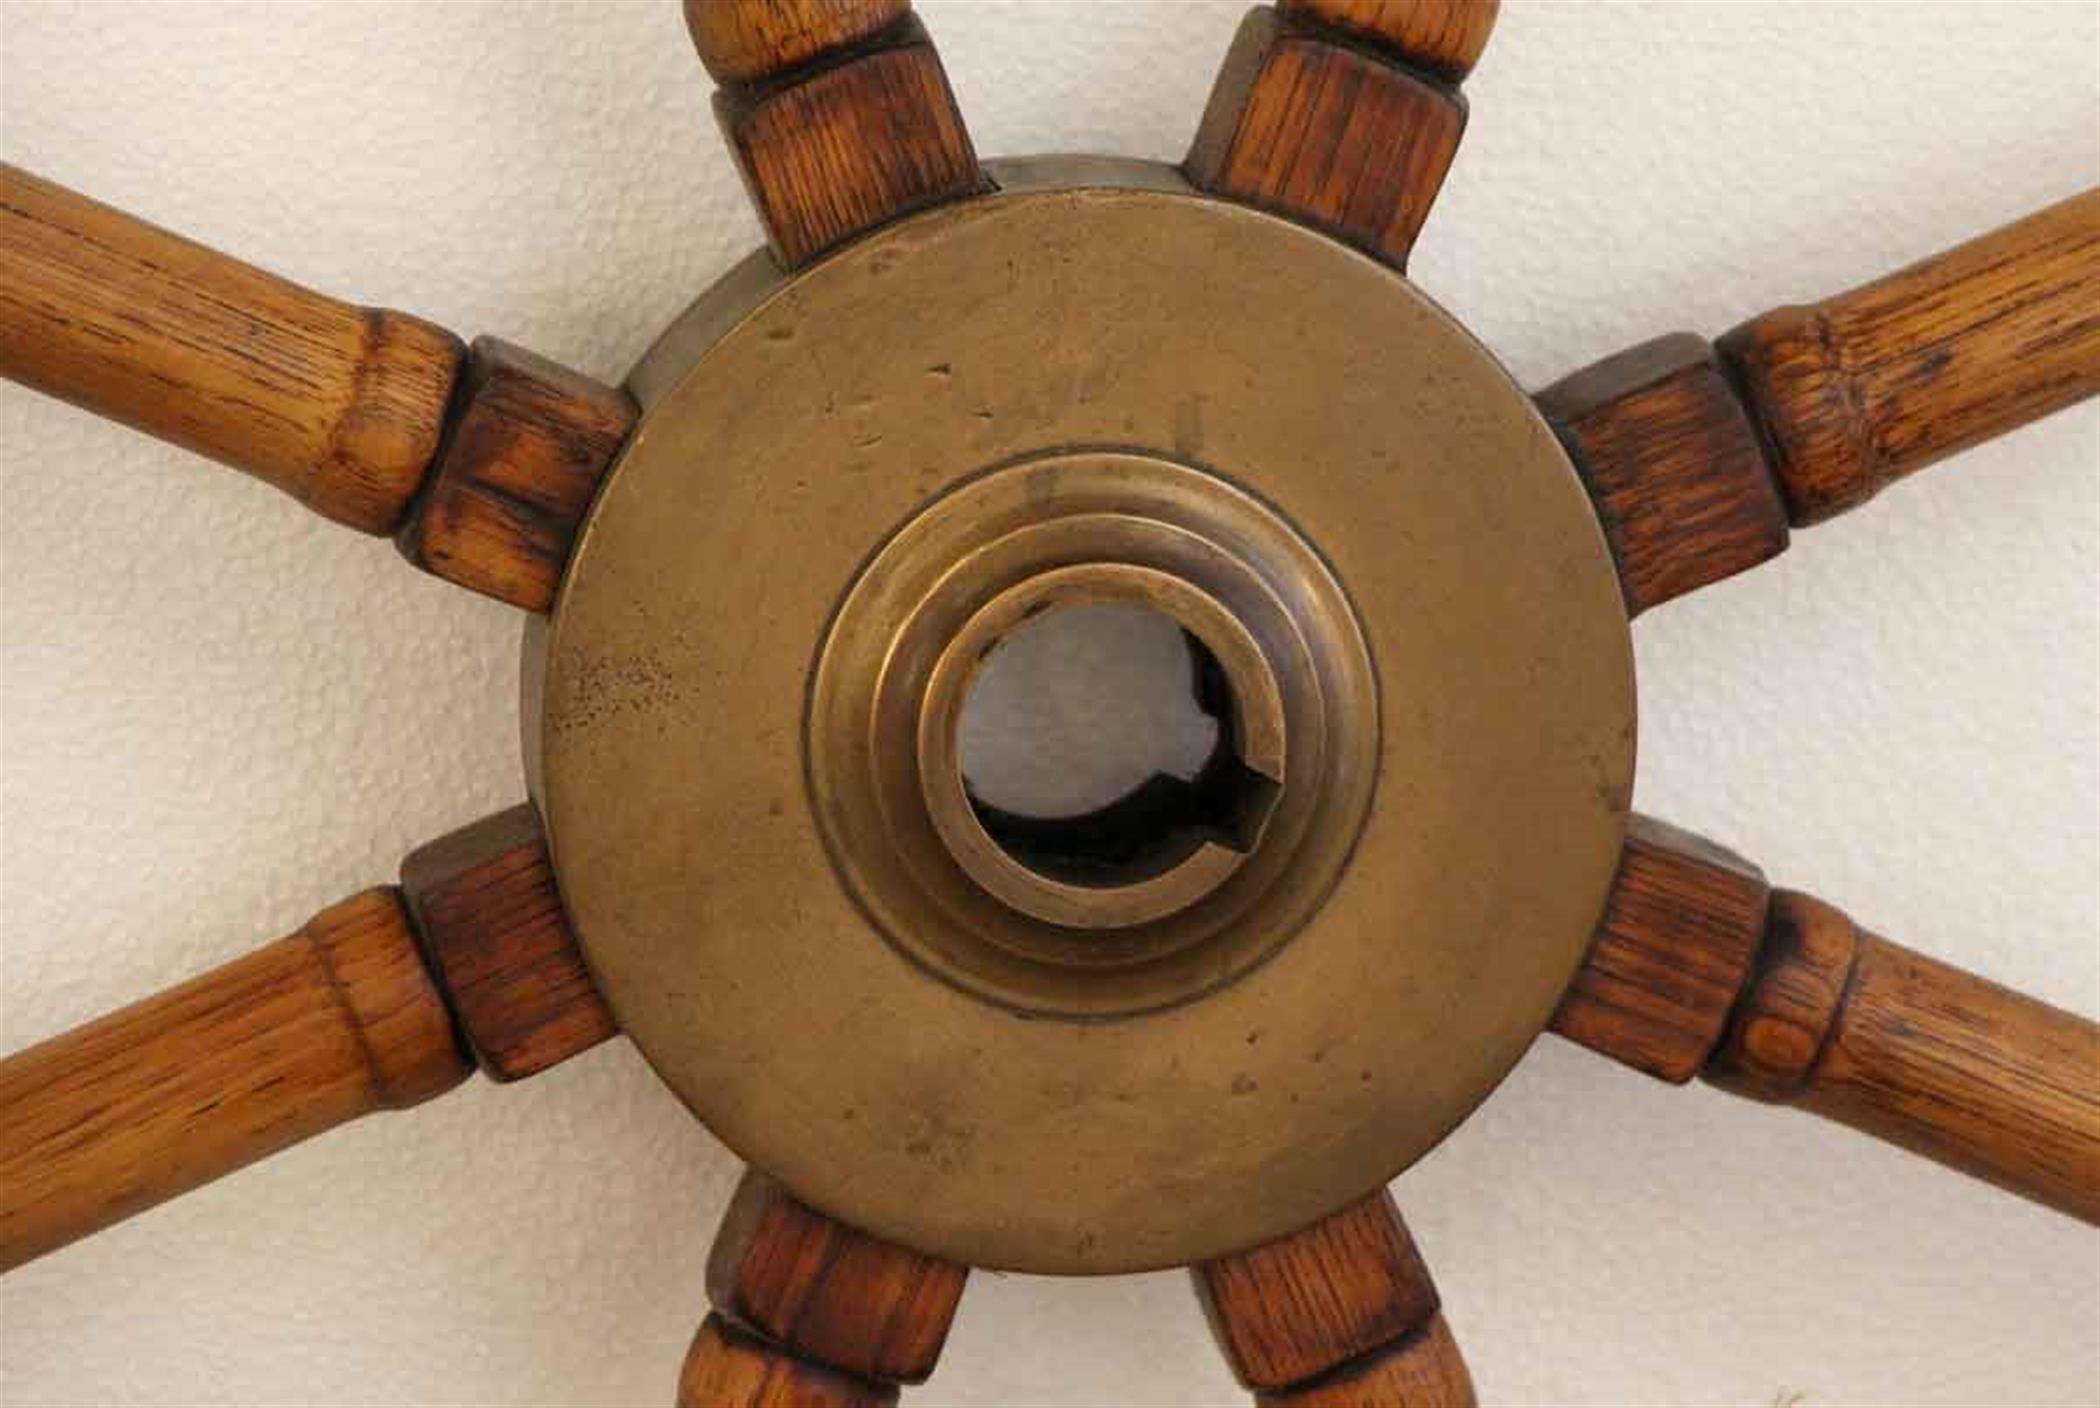 1940s old nautical wooden ship wheel with a bronze center hub. Good size with wood spokes. This can be viewed at one of our New York City locations. Please inquire for the exact address.